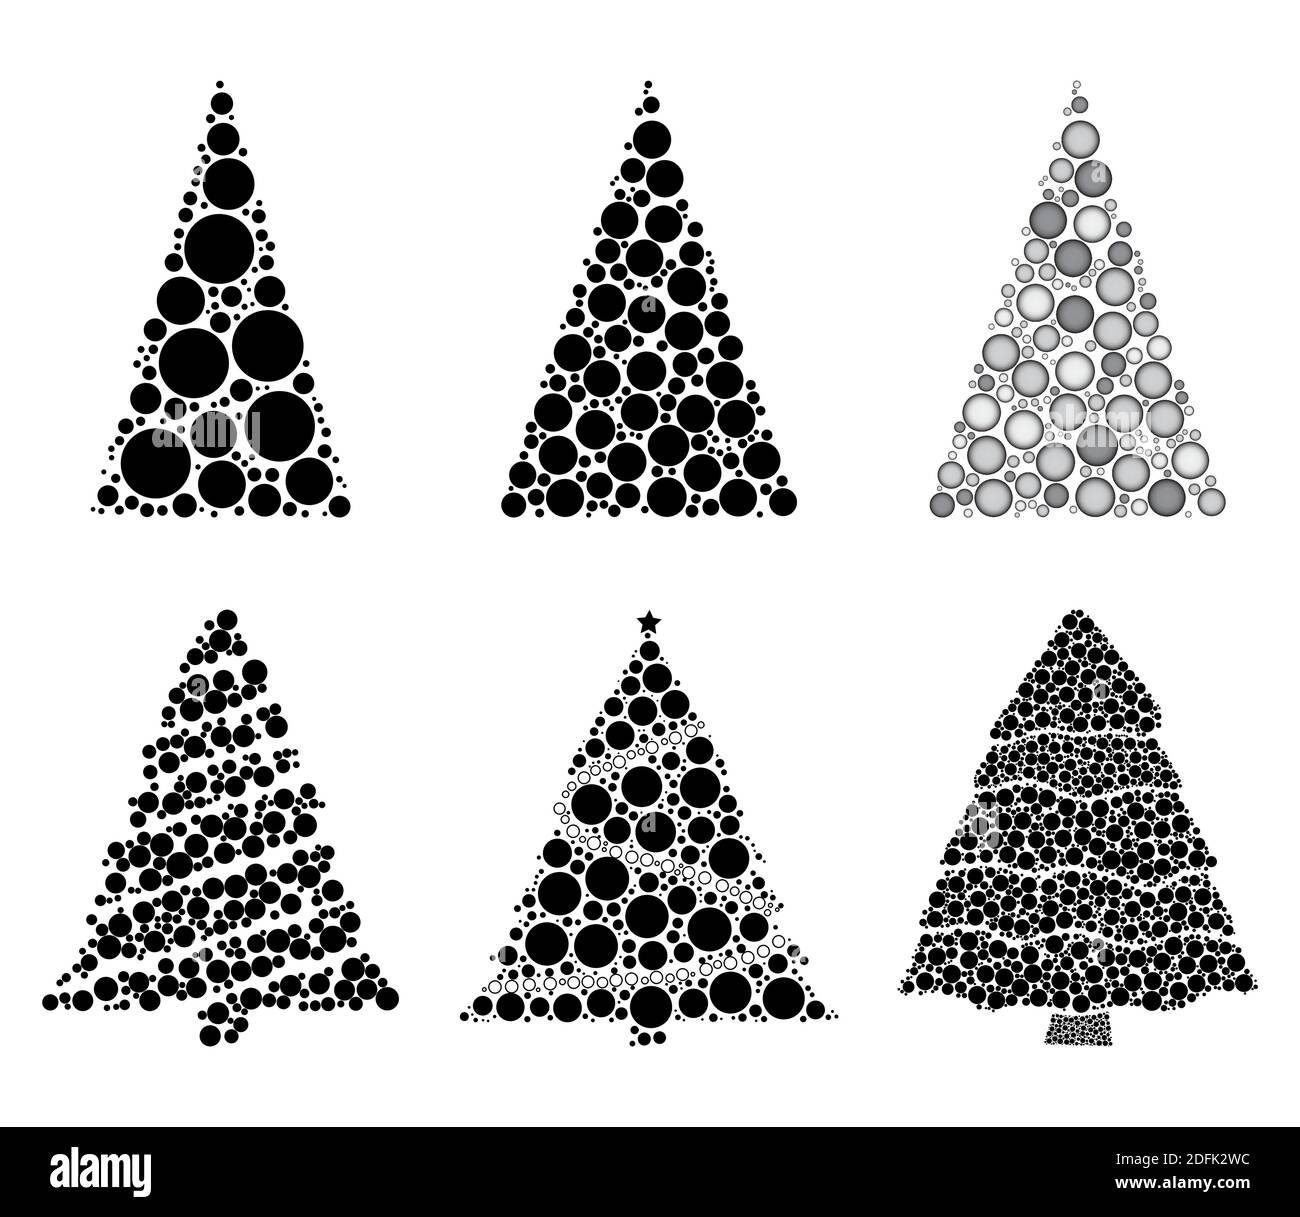 Abstract christmas tree silhouettes made from many dots collection. Set of fir tree made with black circles. Good for retro or vintage xmas card, bann Stock Vector